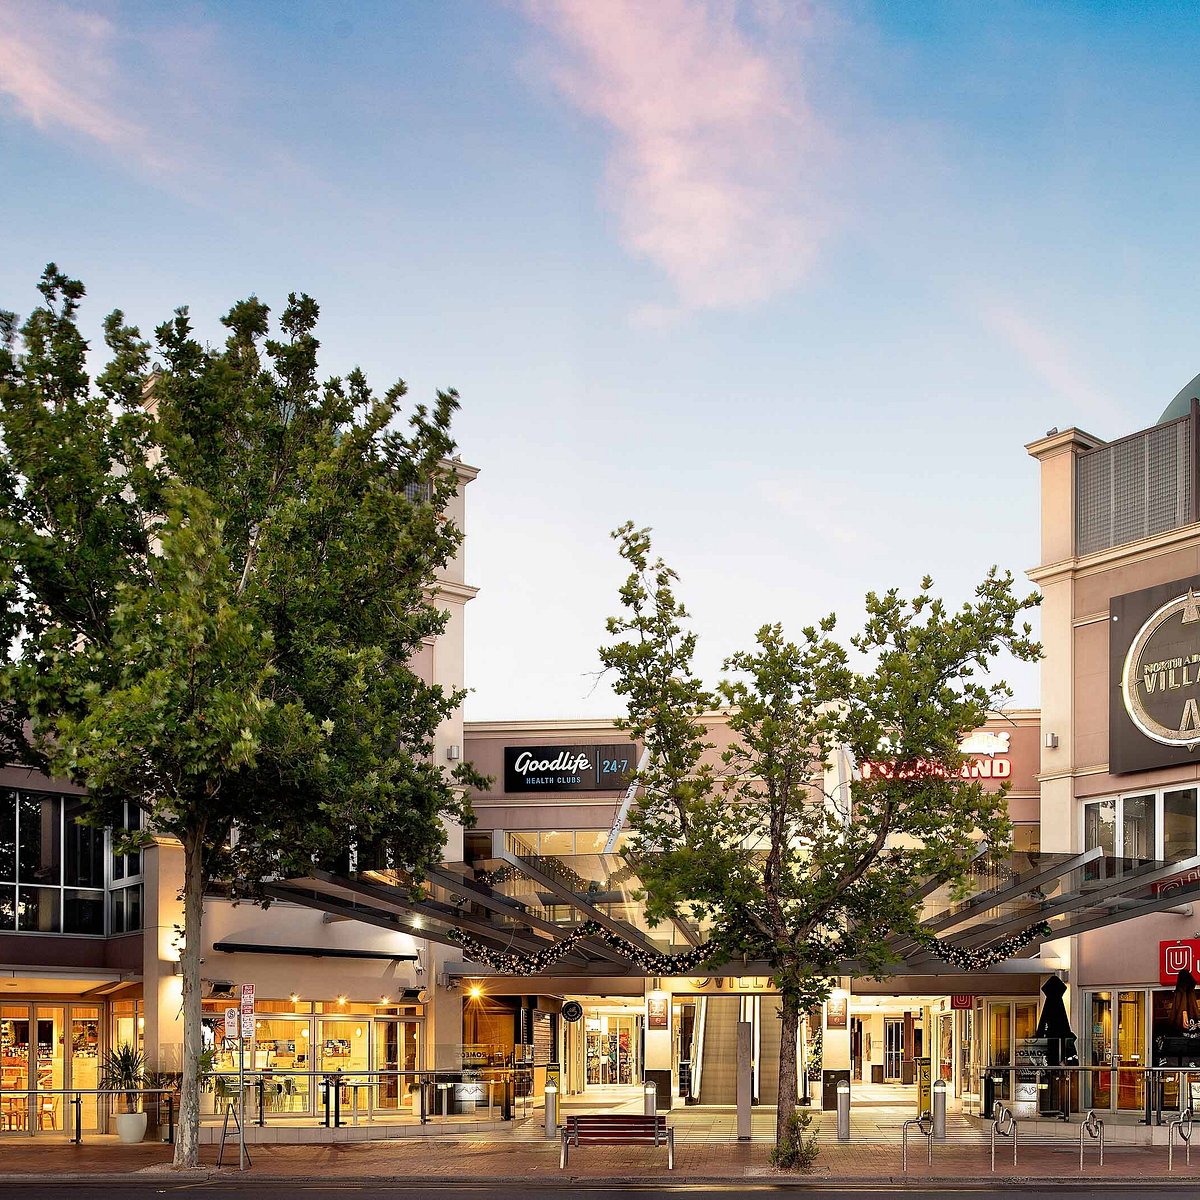 North Adelaide Village Shopping Centre: All You Need to Know